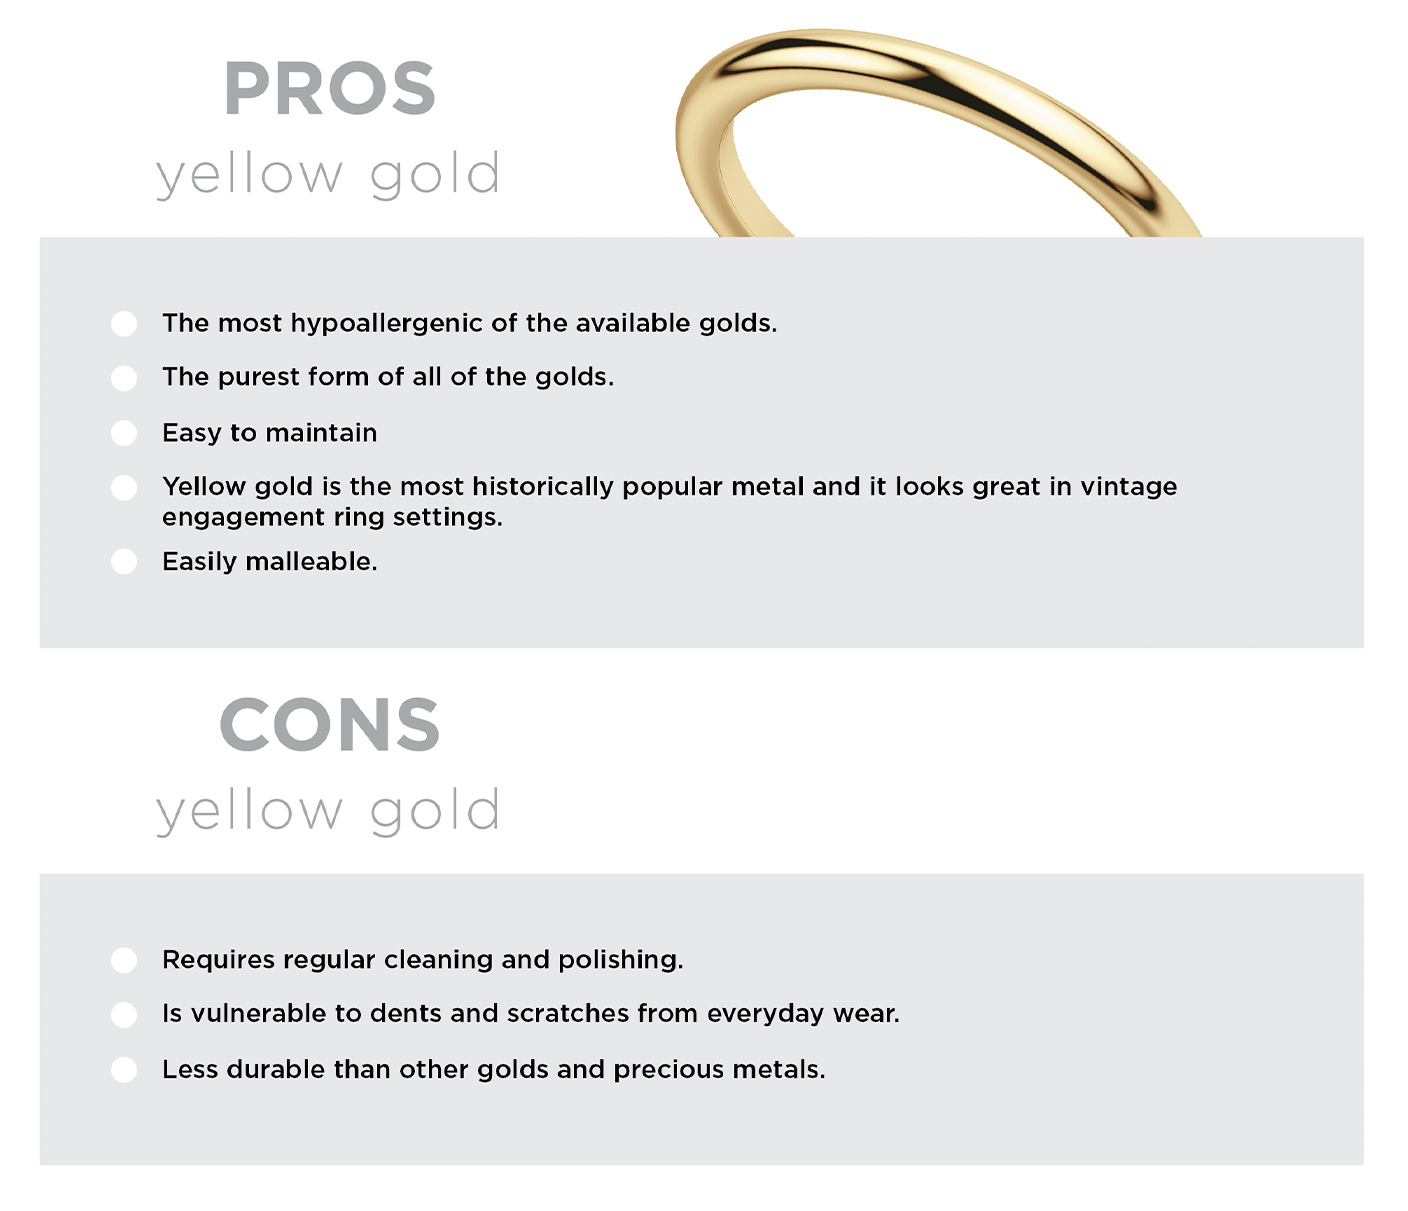 The pros and cons of yellow gold